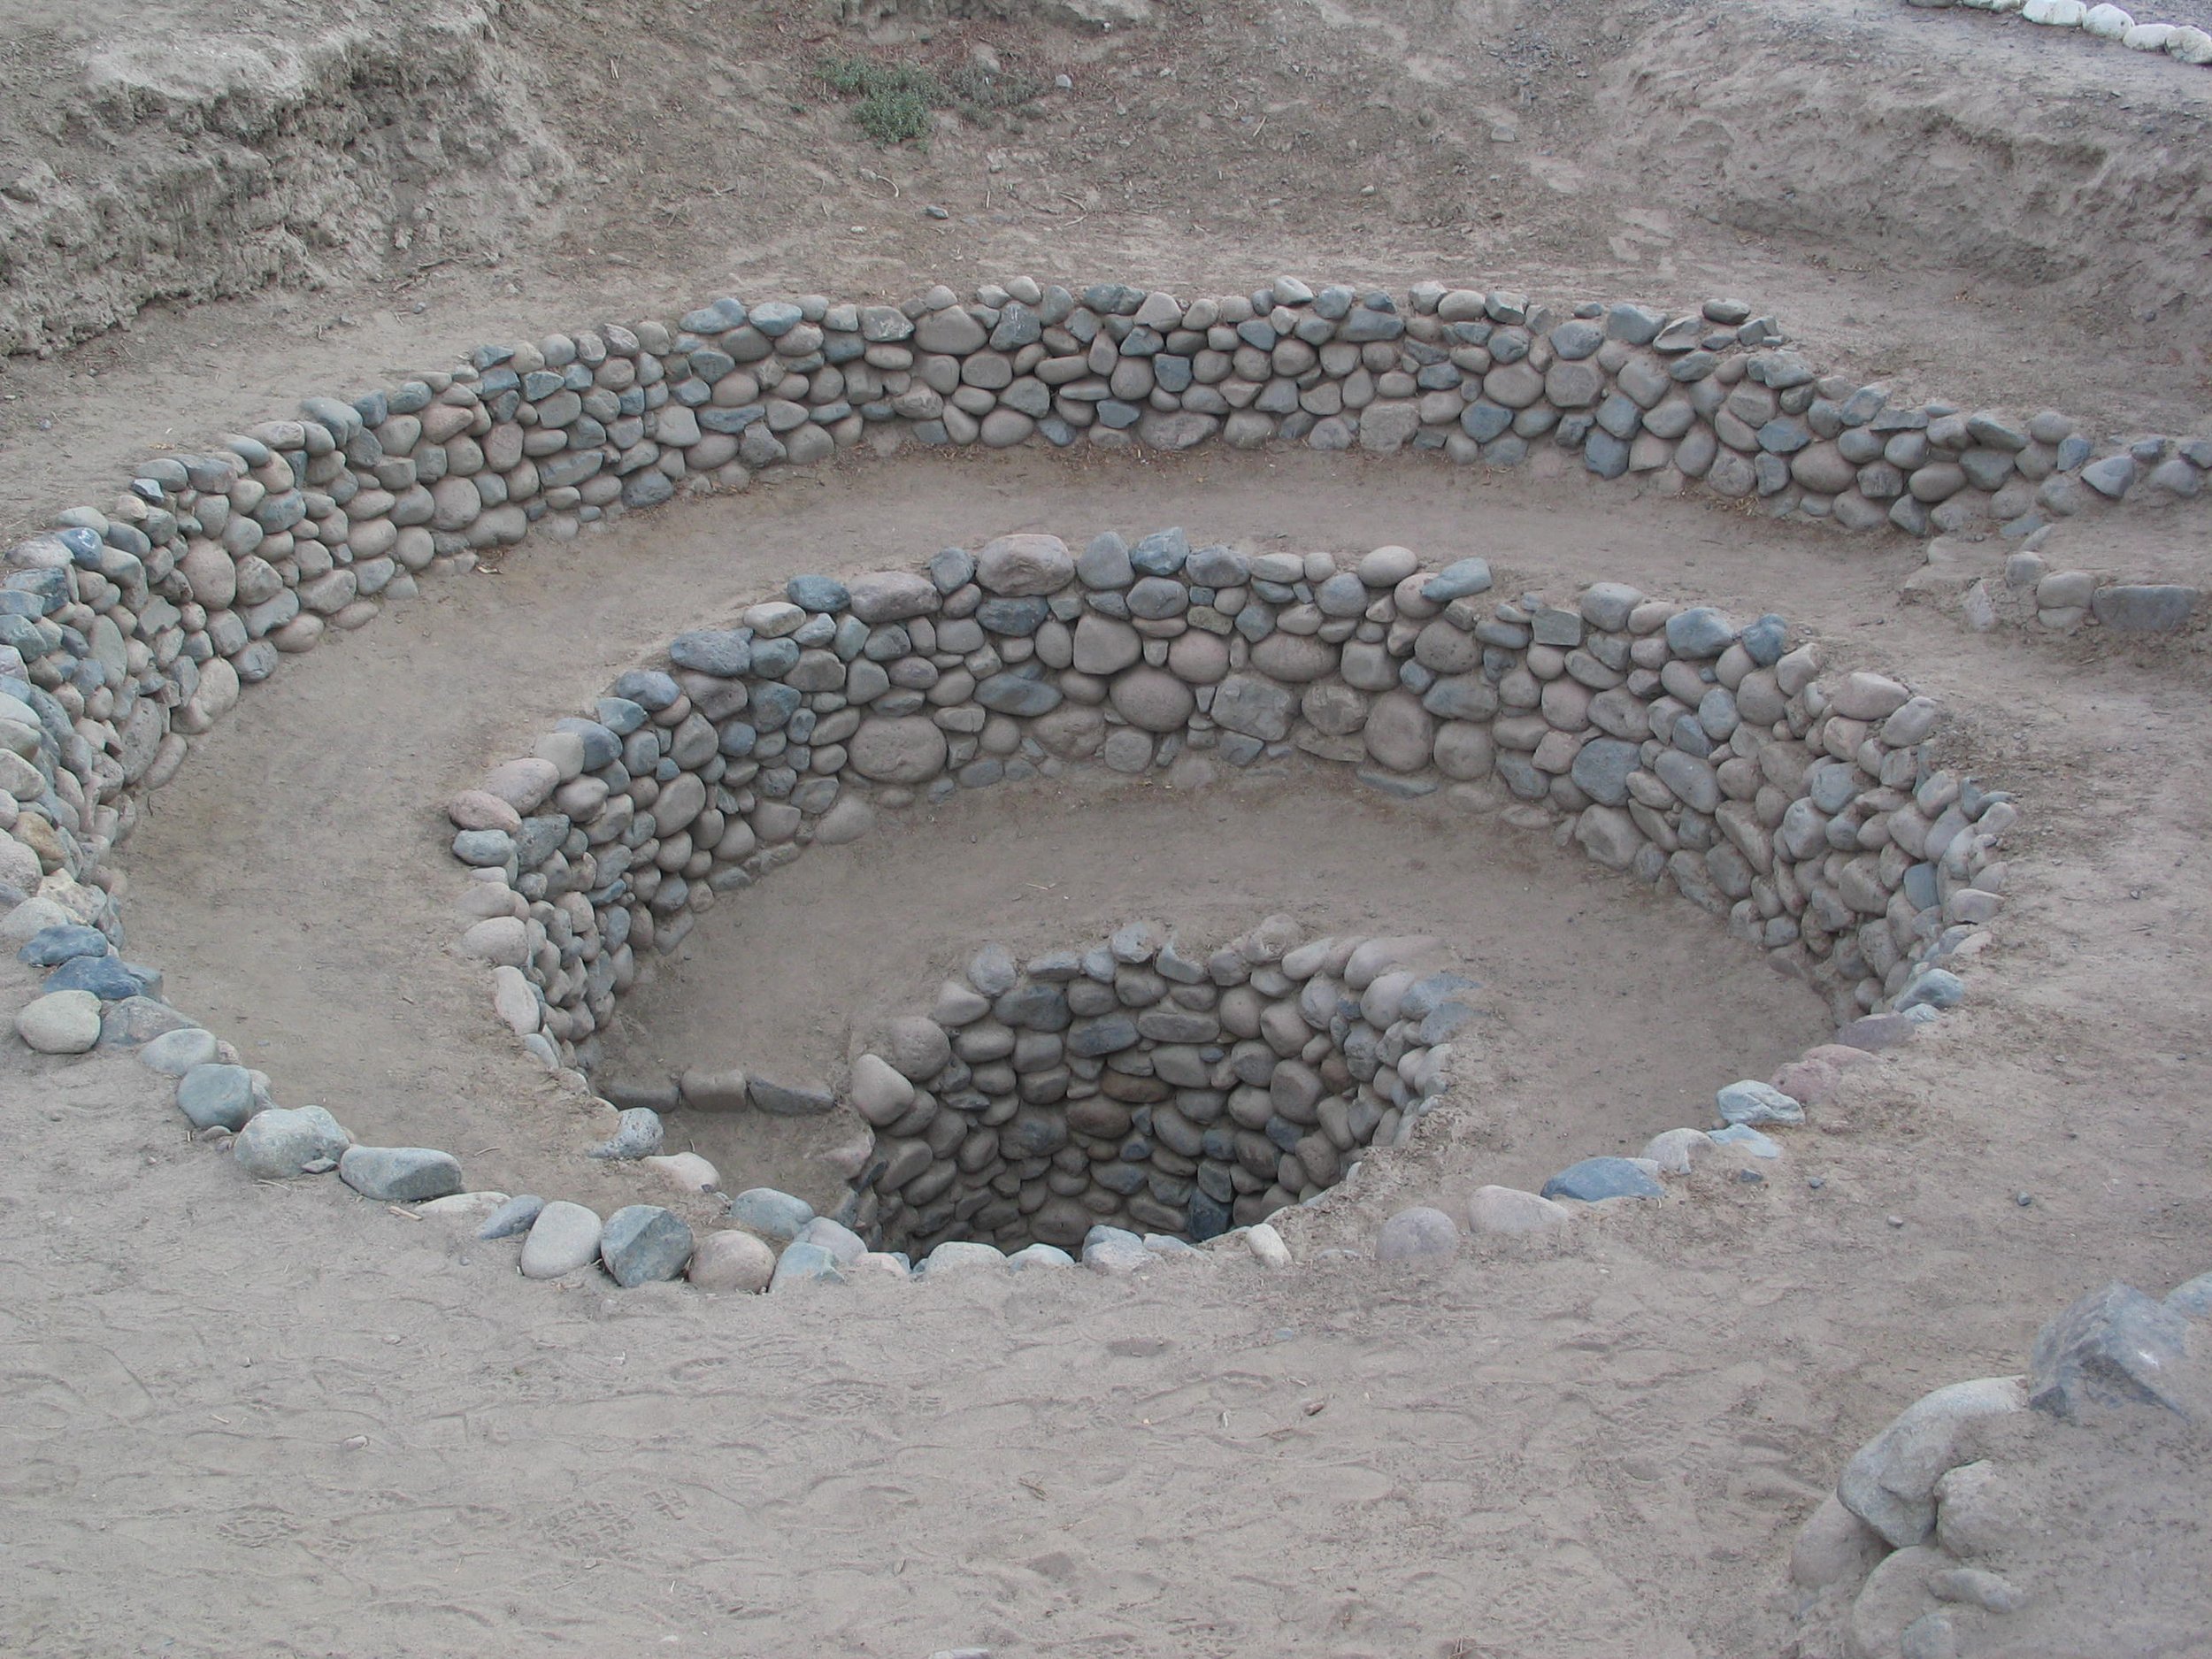  Example of an “ojo” or eye in Spanish, which is an access well to a Nazca “puquio” aqueduct channel. 